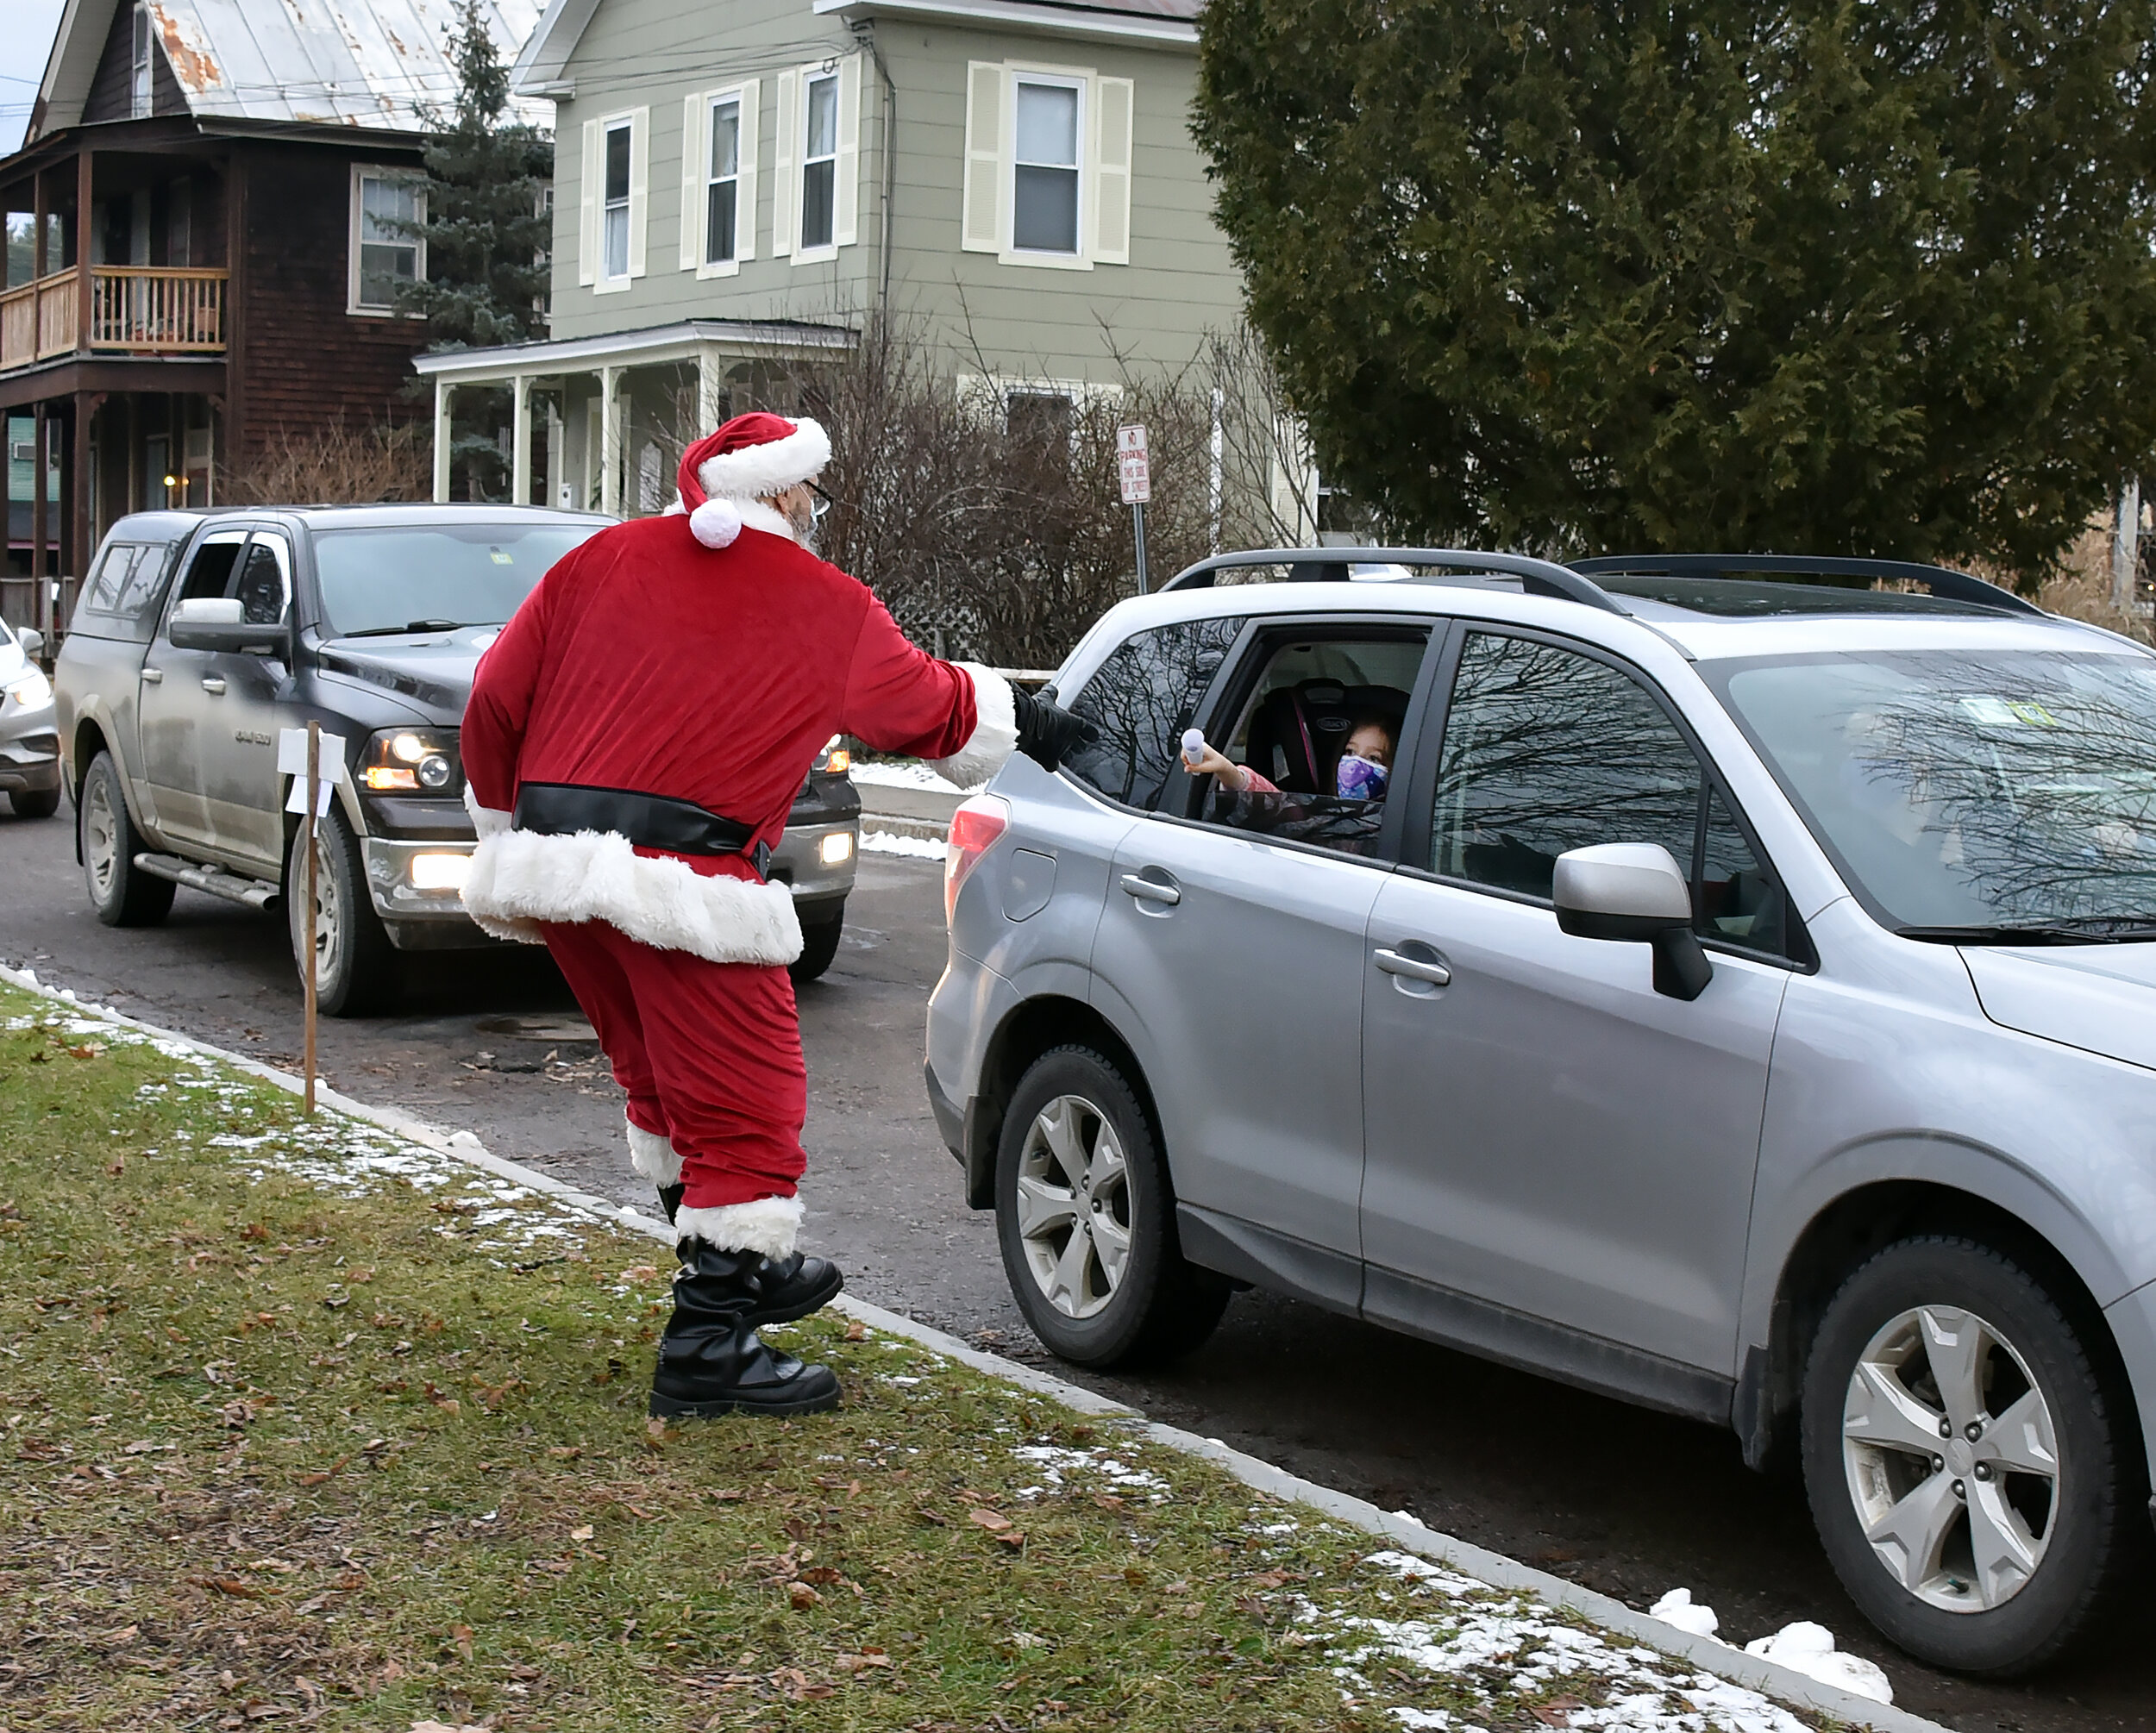   Santa accepts a rolled-up list from a backseat tot. Photo by Gordon Miller.  